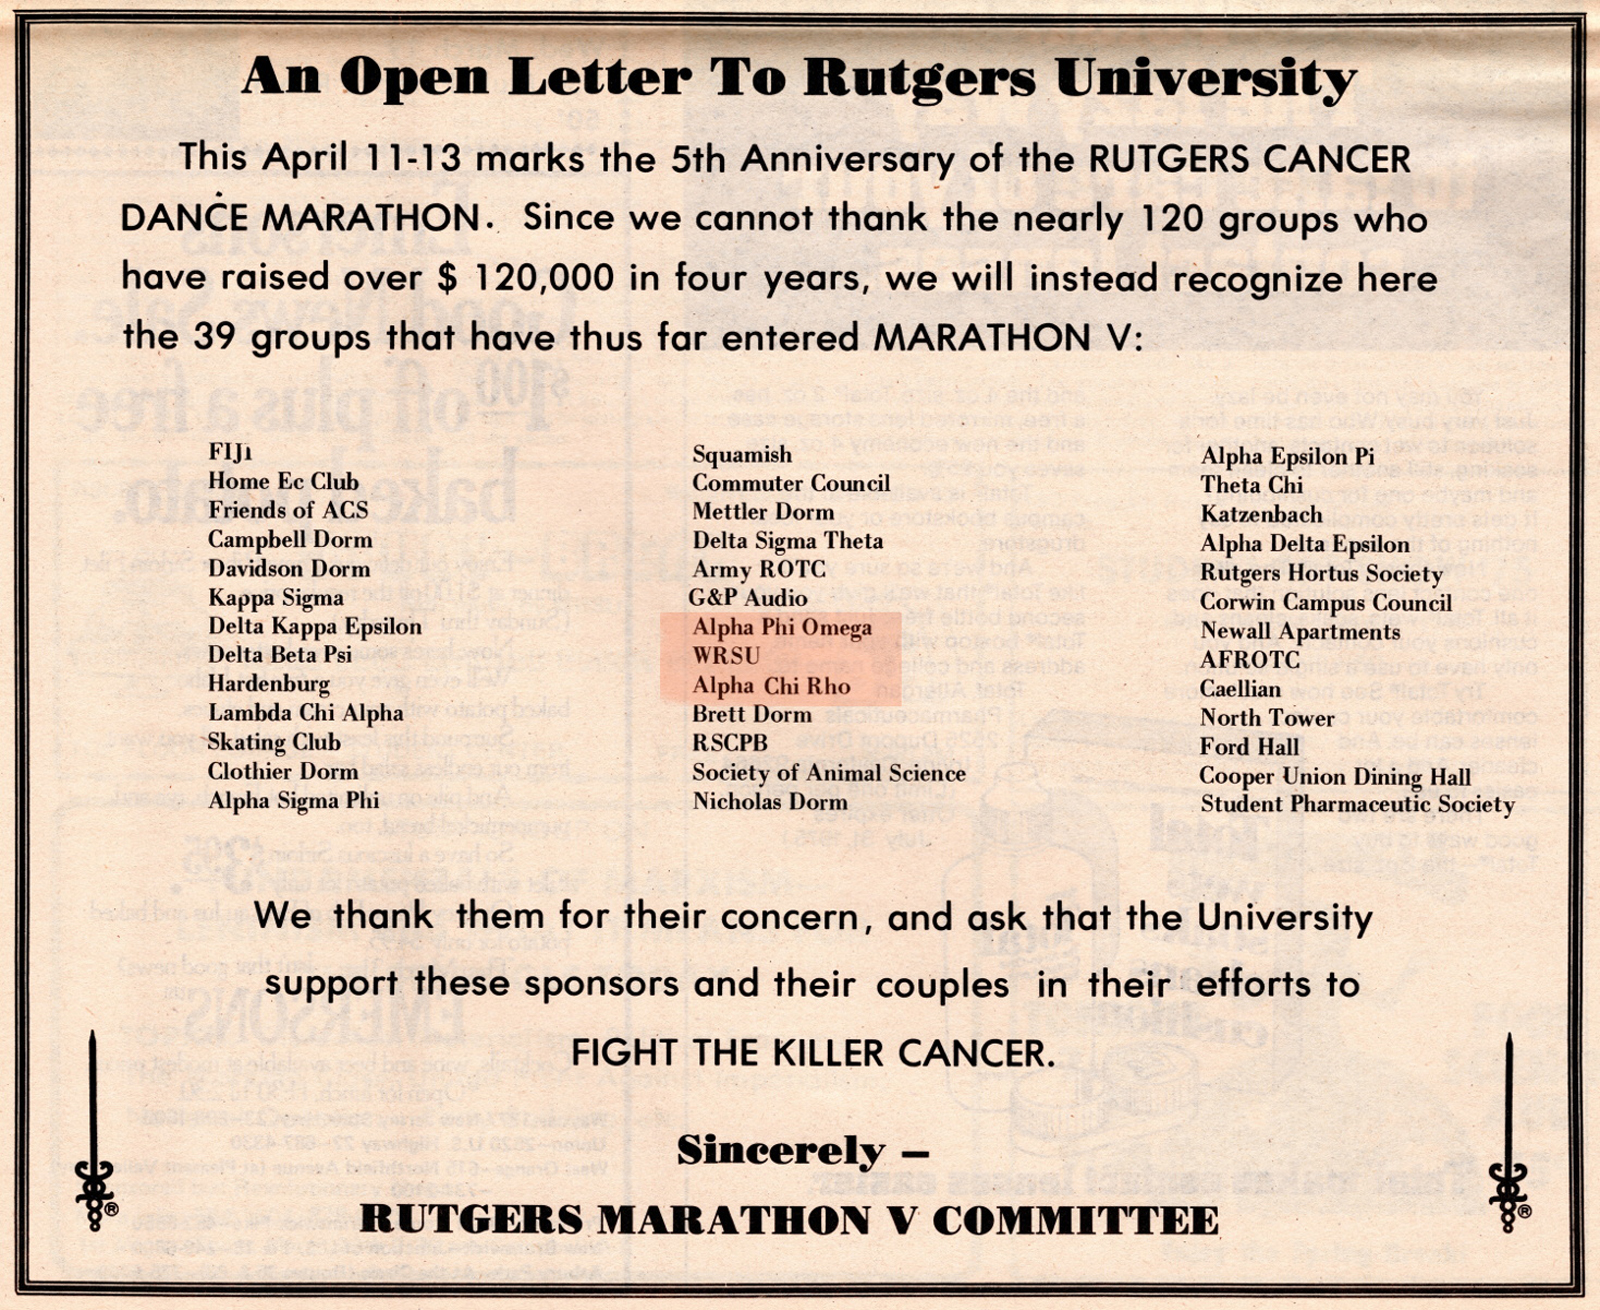 1975 WRSU participated in the Cancer Marathon and Covered live for all three days